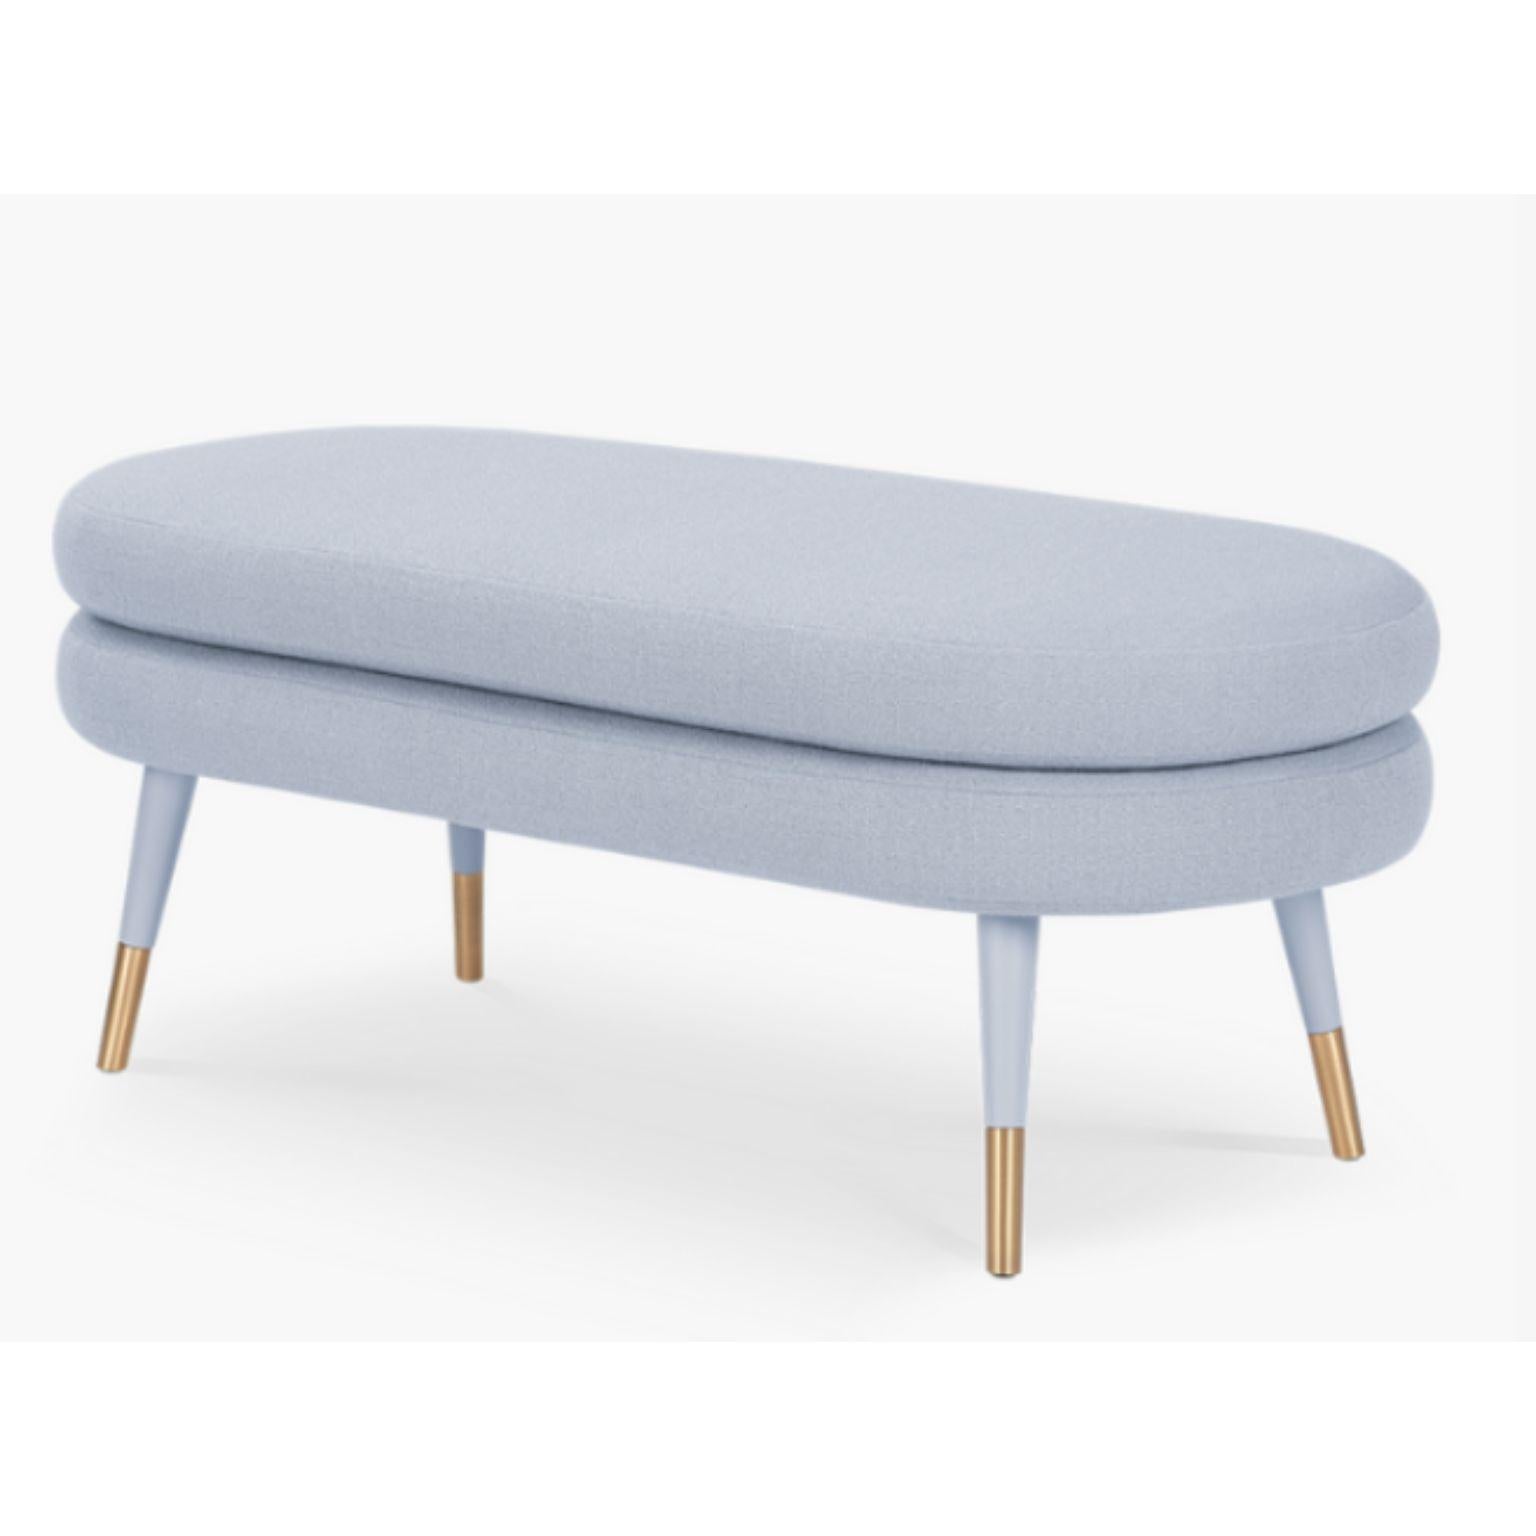 Marshmallow double stool, Royal Stranger
Dimensions: 45 x 114 x 50 cm
Materials: Upholstery Vidar 723
Legs Vidar 723 lacquered wood with matte finish.
Feet covers brushed brass.

Different materials and finishes available.

Royal Stranger is